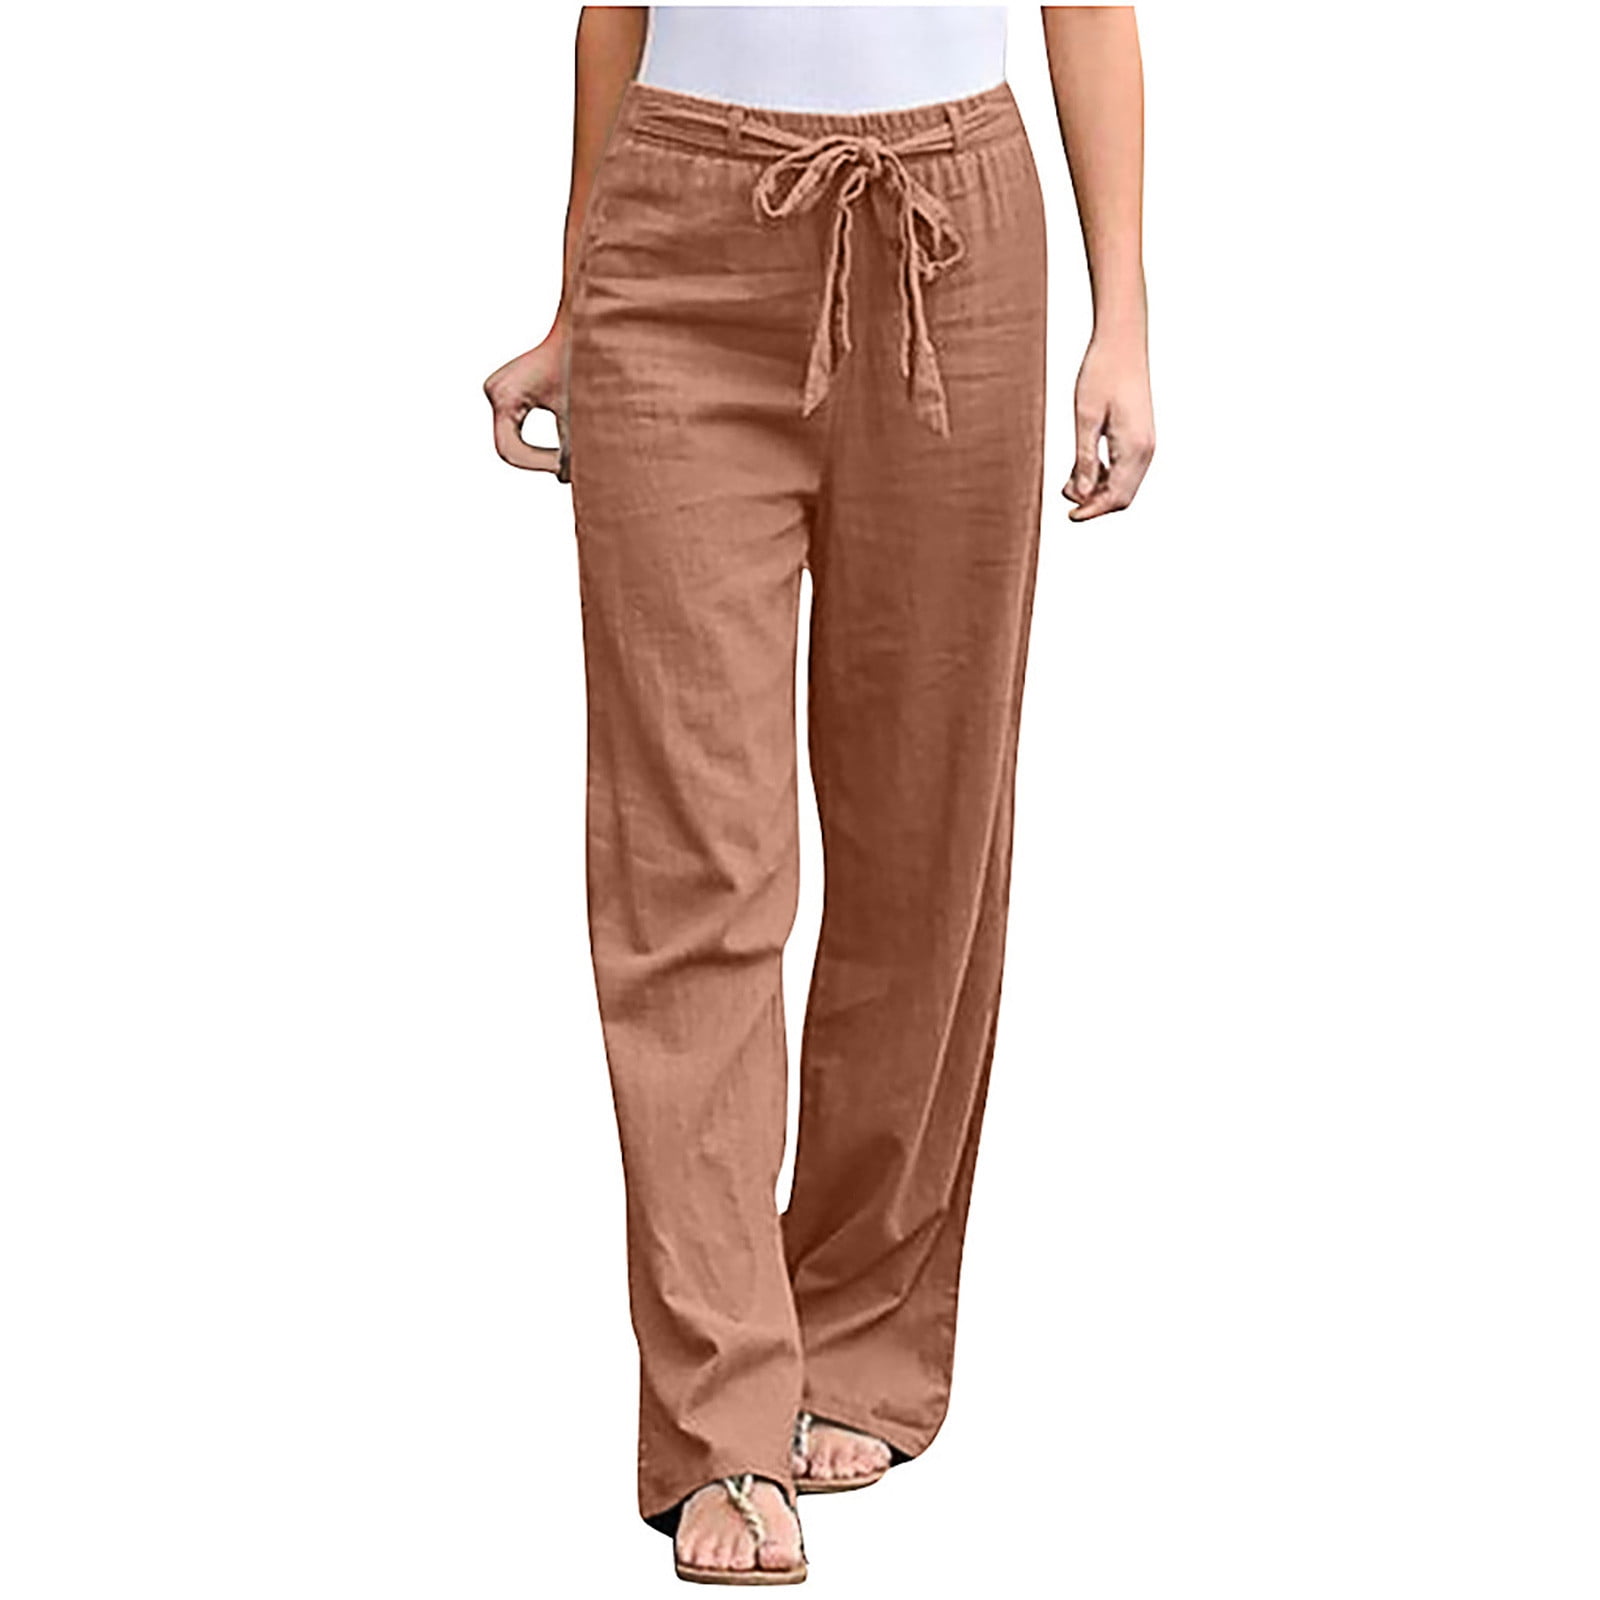 KIHOUT Pants For Women Deals Solid Color Pockets Buttons Elastic Waist  Comfortable Straight Pants 